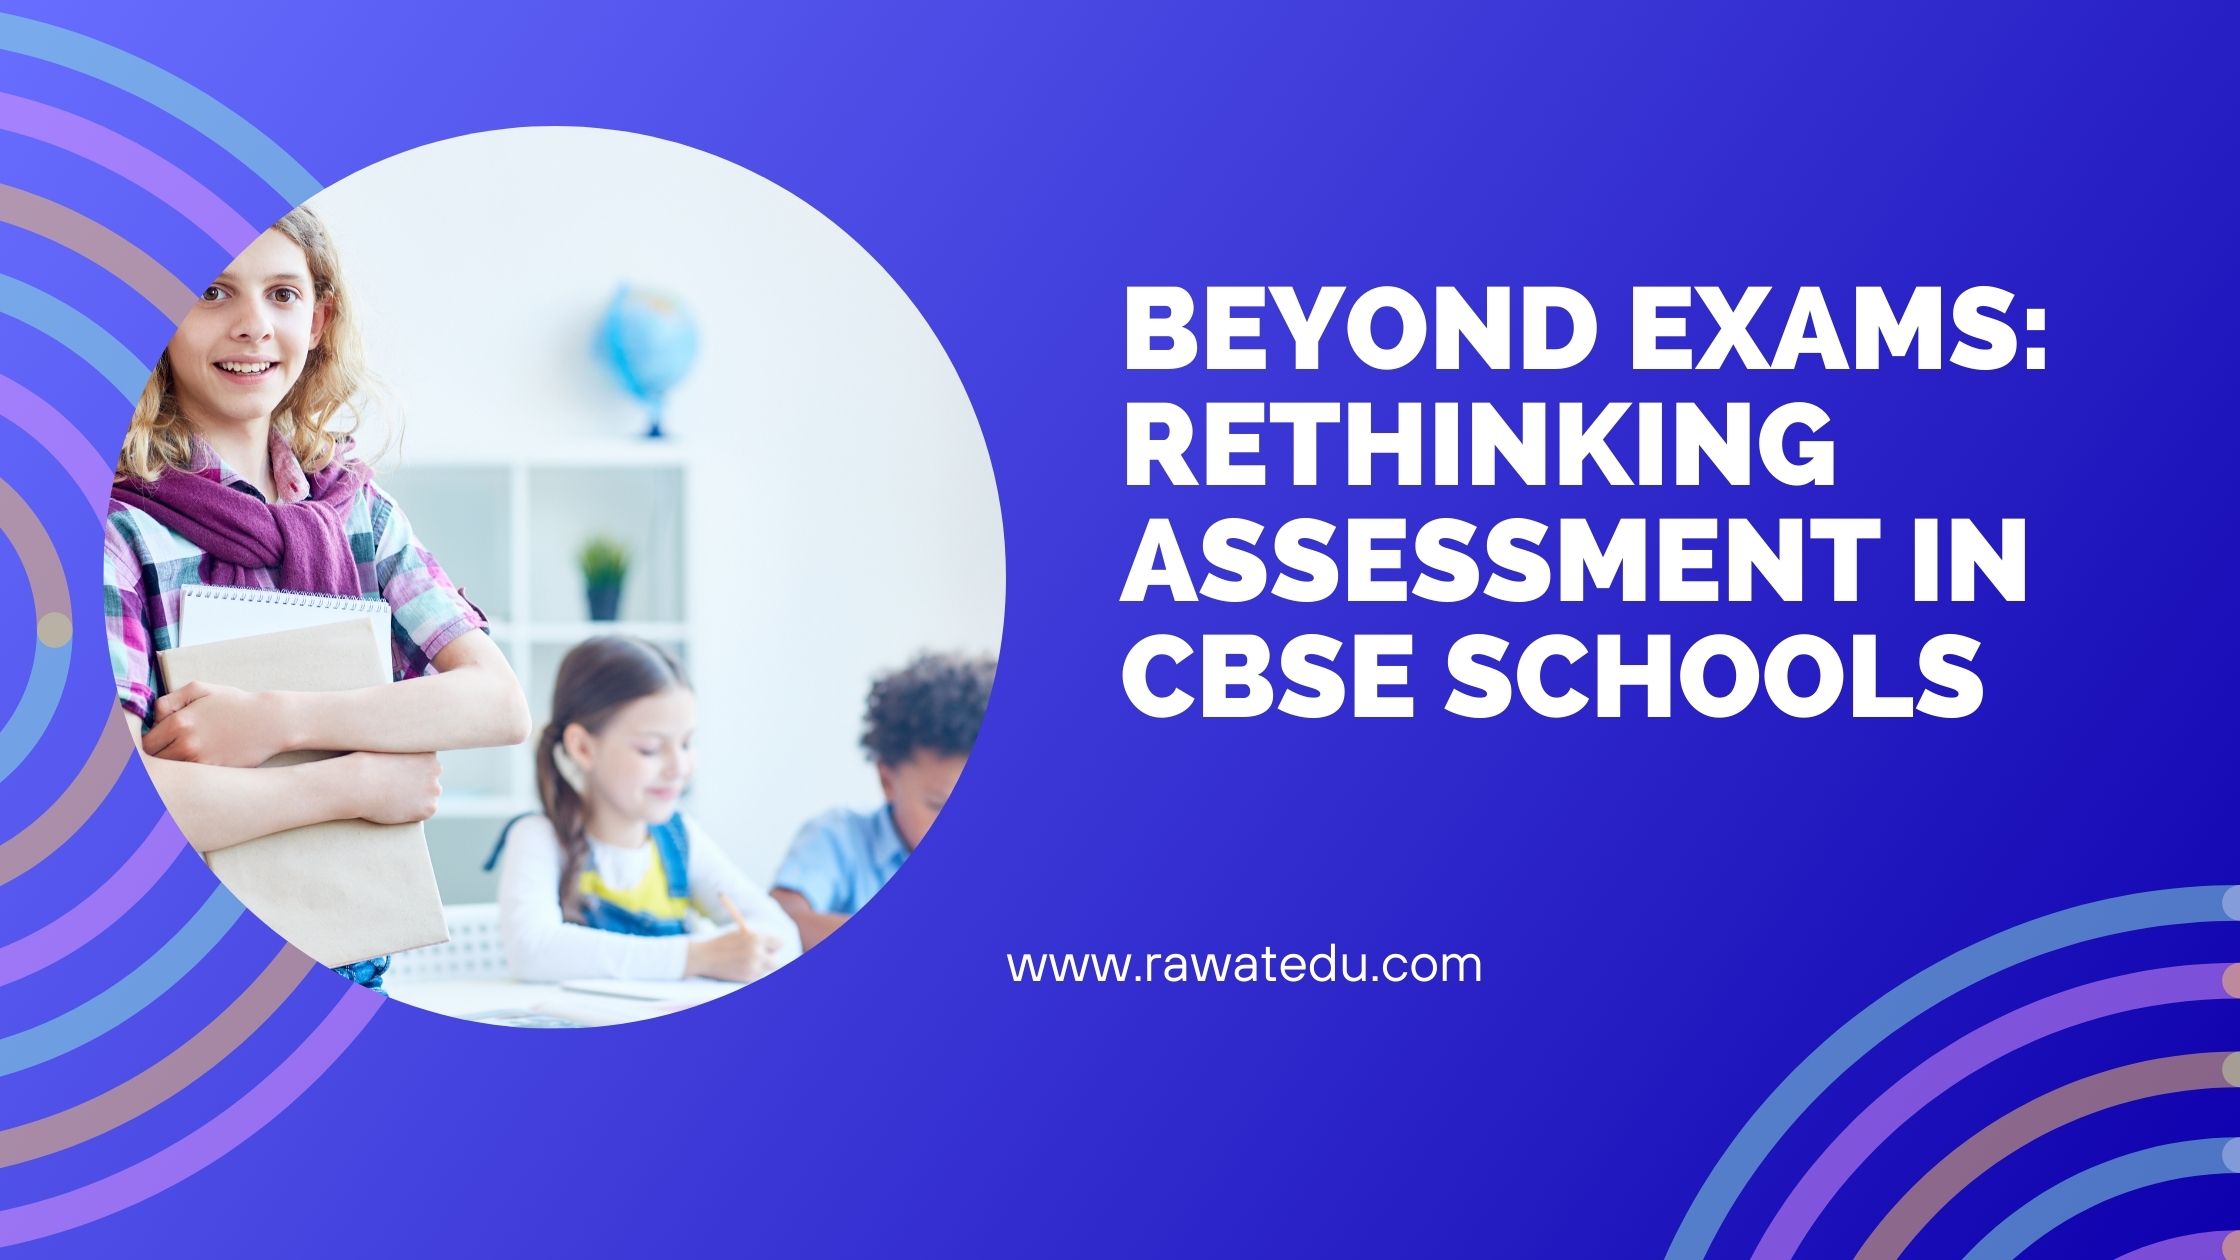 Beyond Exams: Rethinking Assessment in CBSE Schools